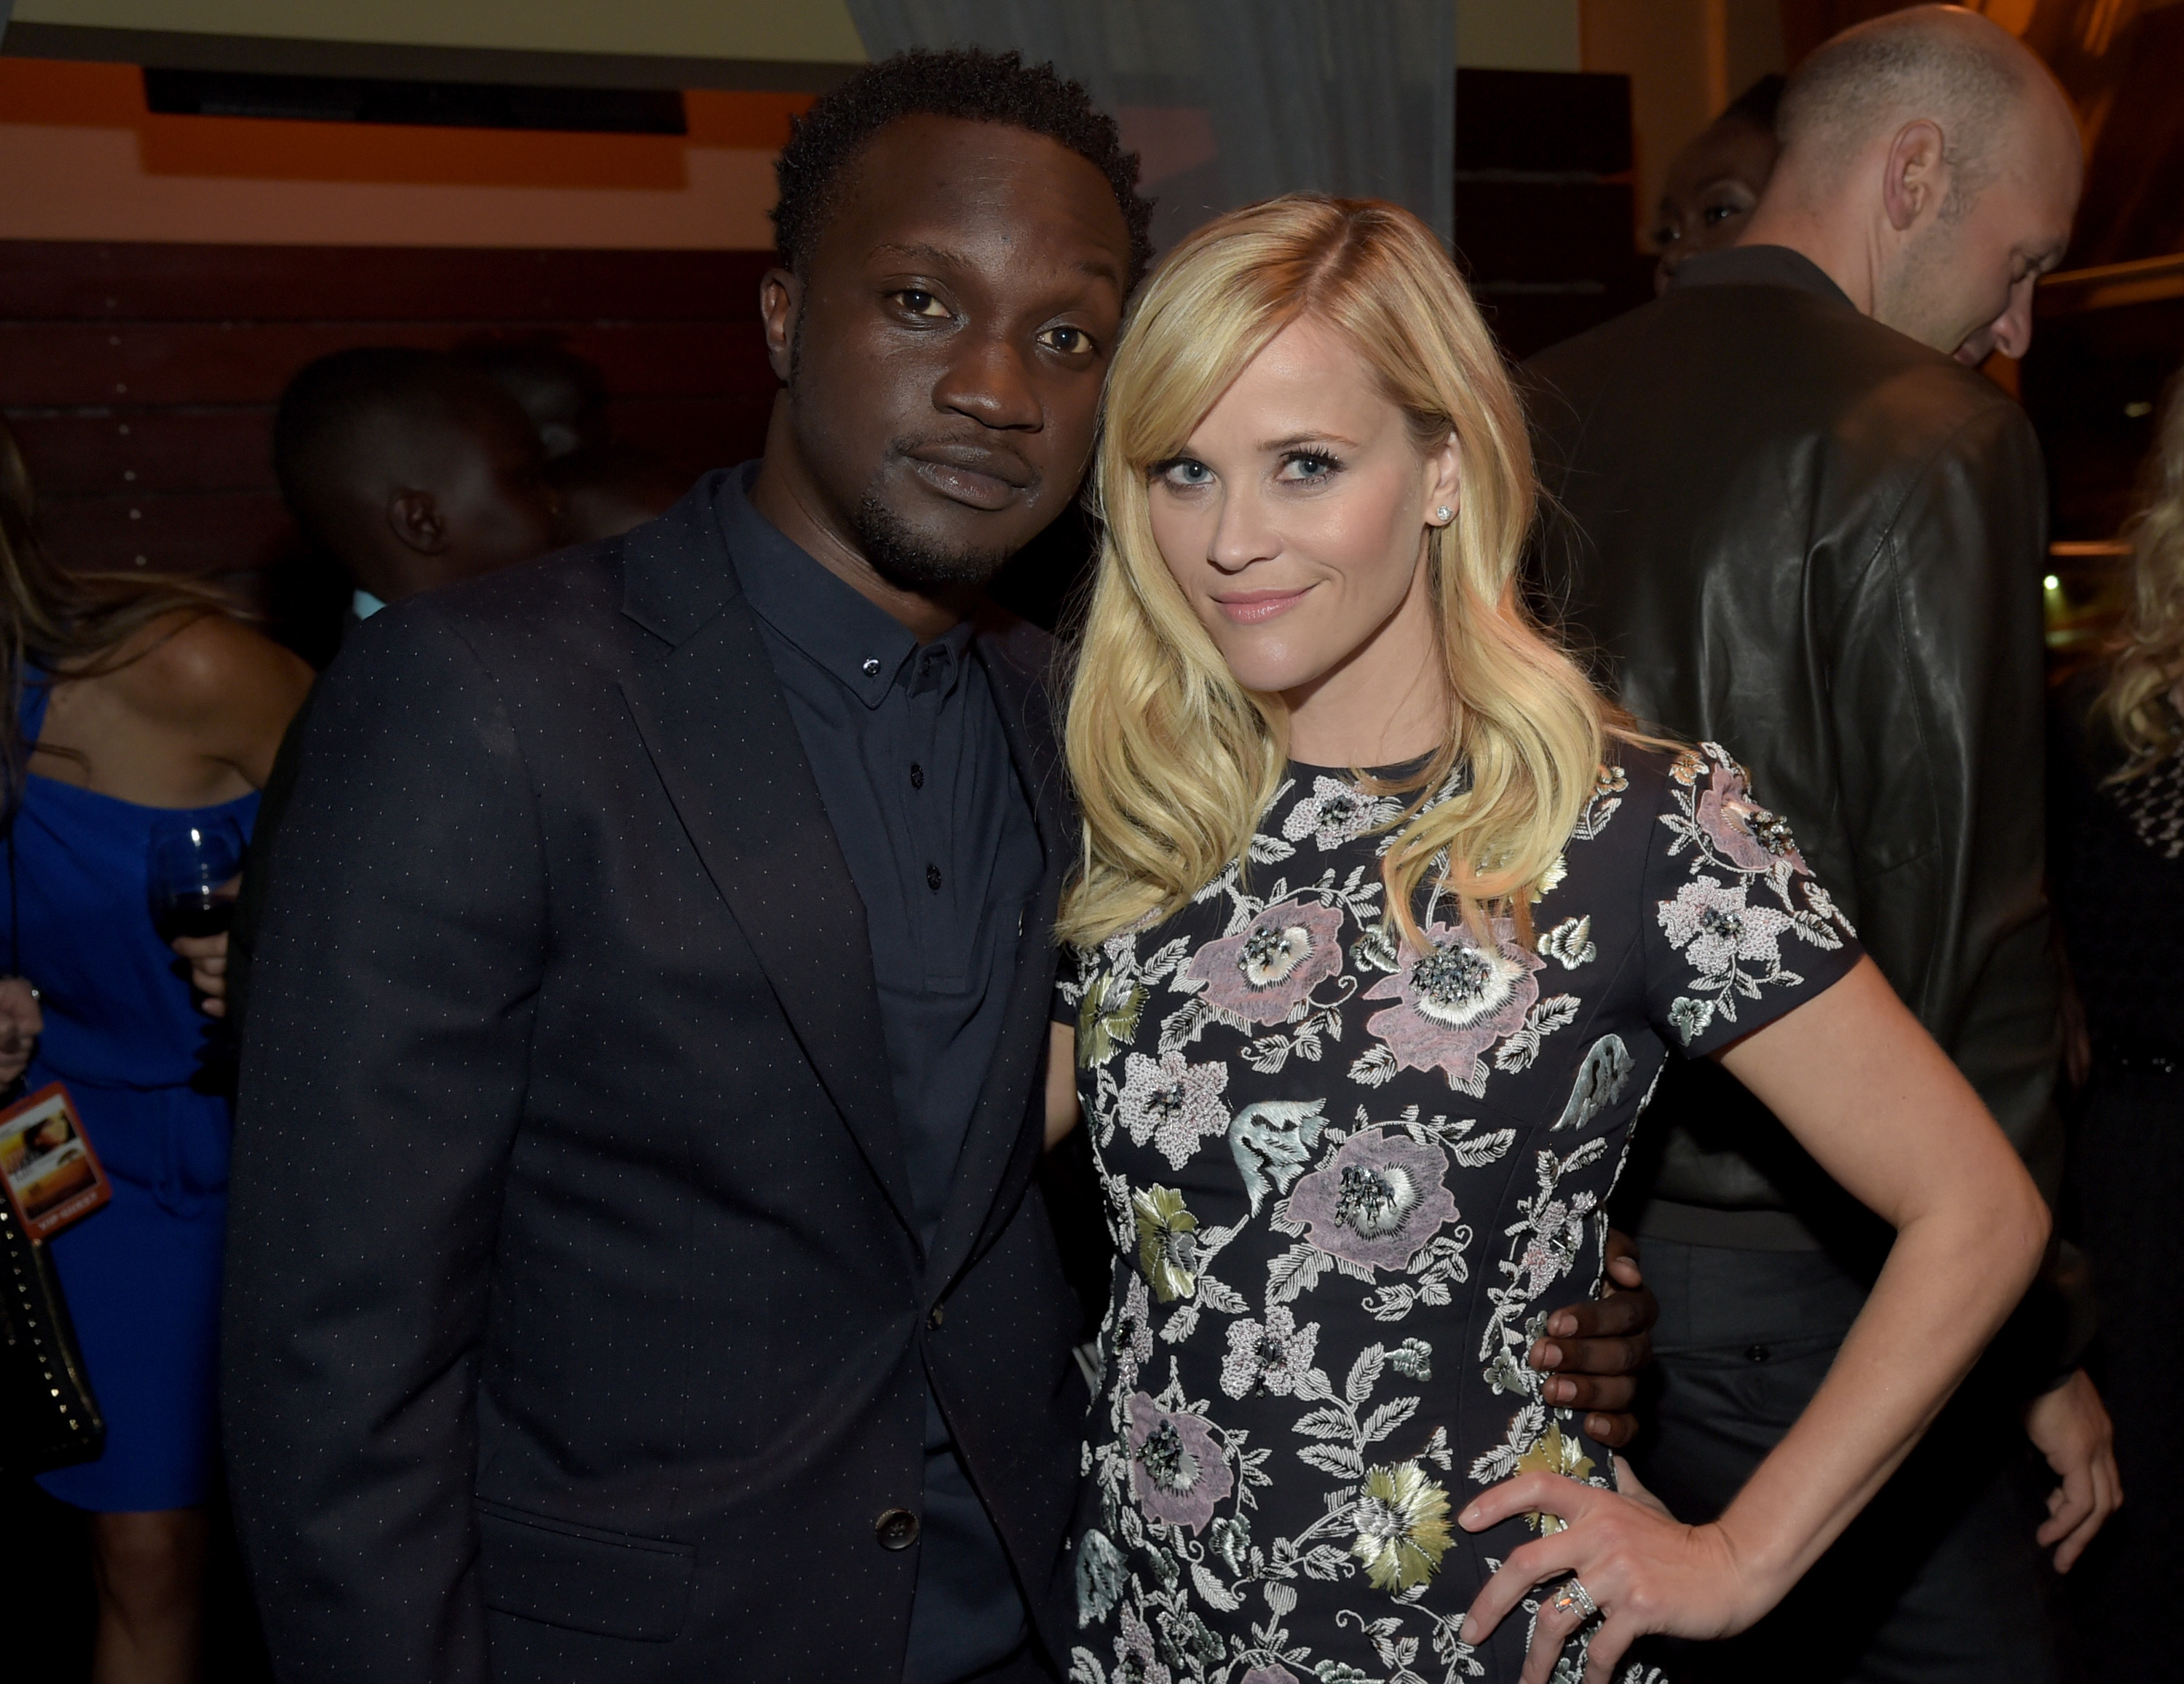 Actors Arnold Oceng and Reese Witherspoon attend "The Good Lie" after party at Cabana on Sept. 19, 2014 in Nashville, Tennessee. (Rick Diamond— Warner Bros/Getty Images)